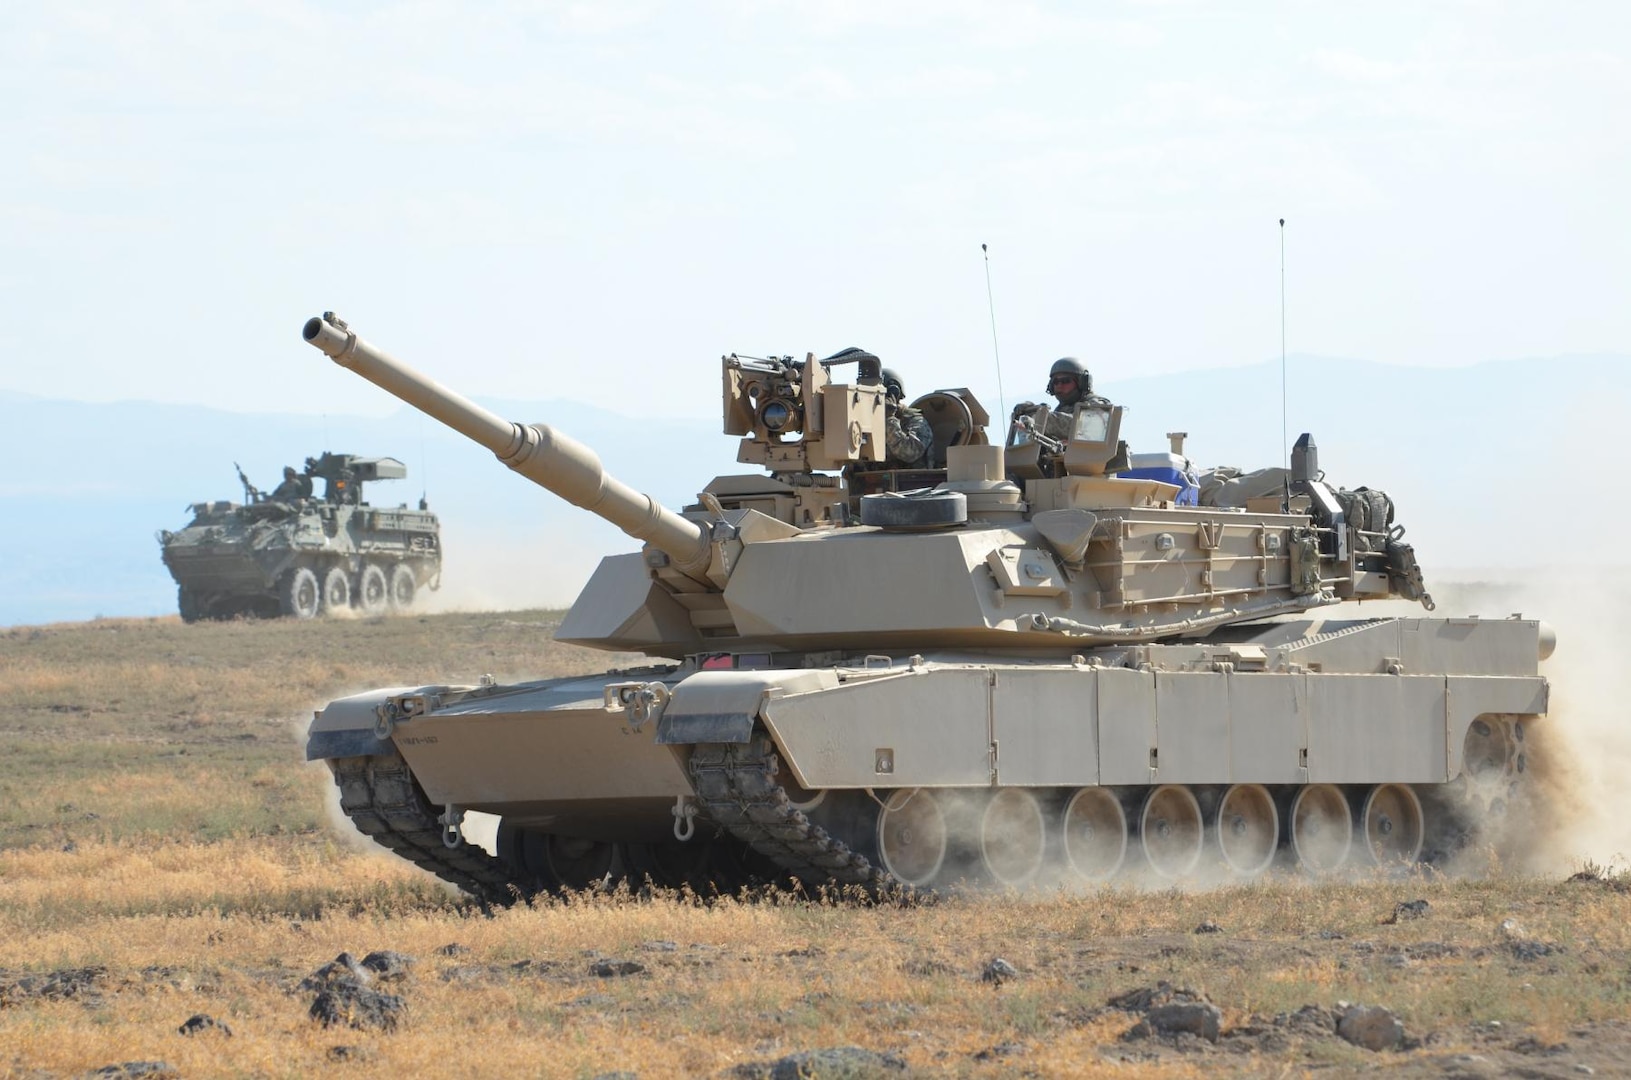 An M1A2 SEP Abrams from 116th Cavalry Brigade Combat Team, Idaho Army National Guard (middle) and a M1134 Anti-Tank Guided Missile Vehicle from 1st Squadron, 14th Infantry Regiment, 3rd Stryker Brigade Combat Team, Joint Base Lewis-McChord, Washington, return from waging mock battle against one another during an eXportable Combat Training Capability exercise, at Orchard Combat Training Center, south of Boise, Idaho, Aug. 14, 2014.